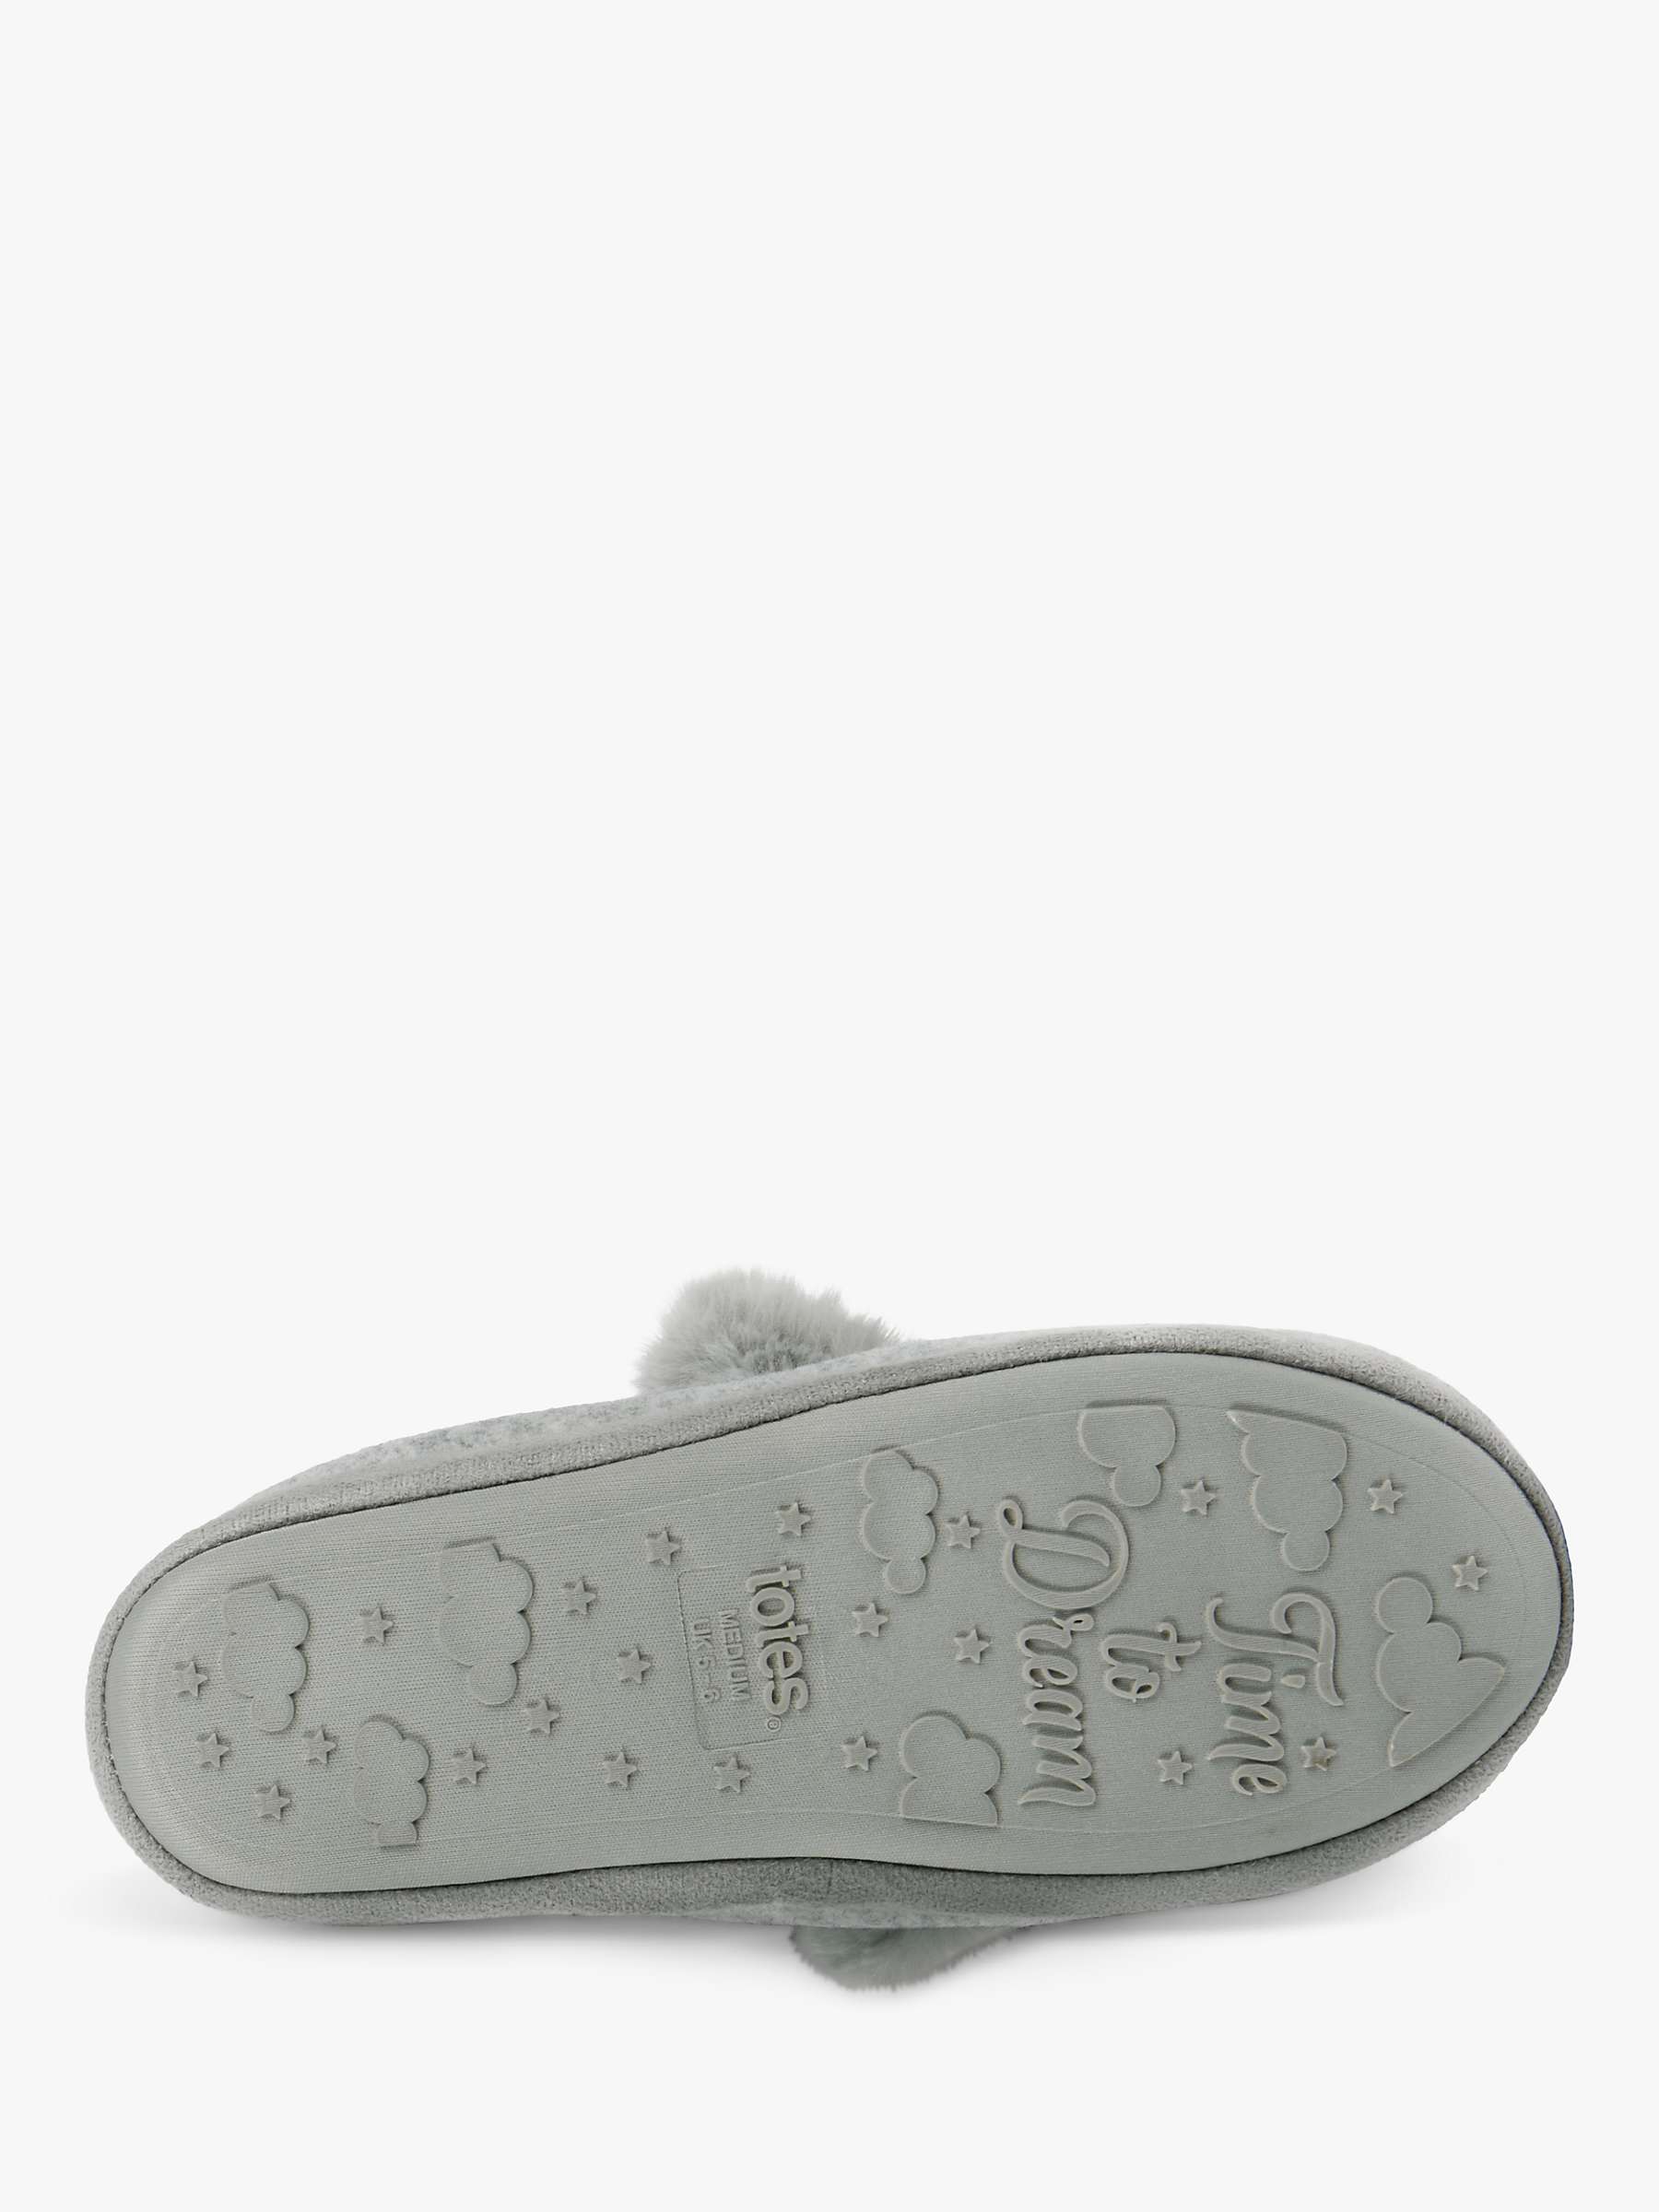 Buy totes Novelty Bunny Slippers, Grey Online at johnlewis.com